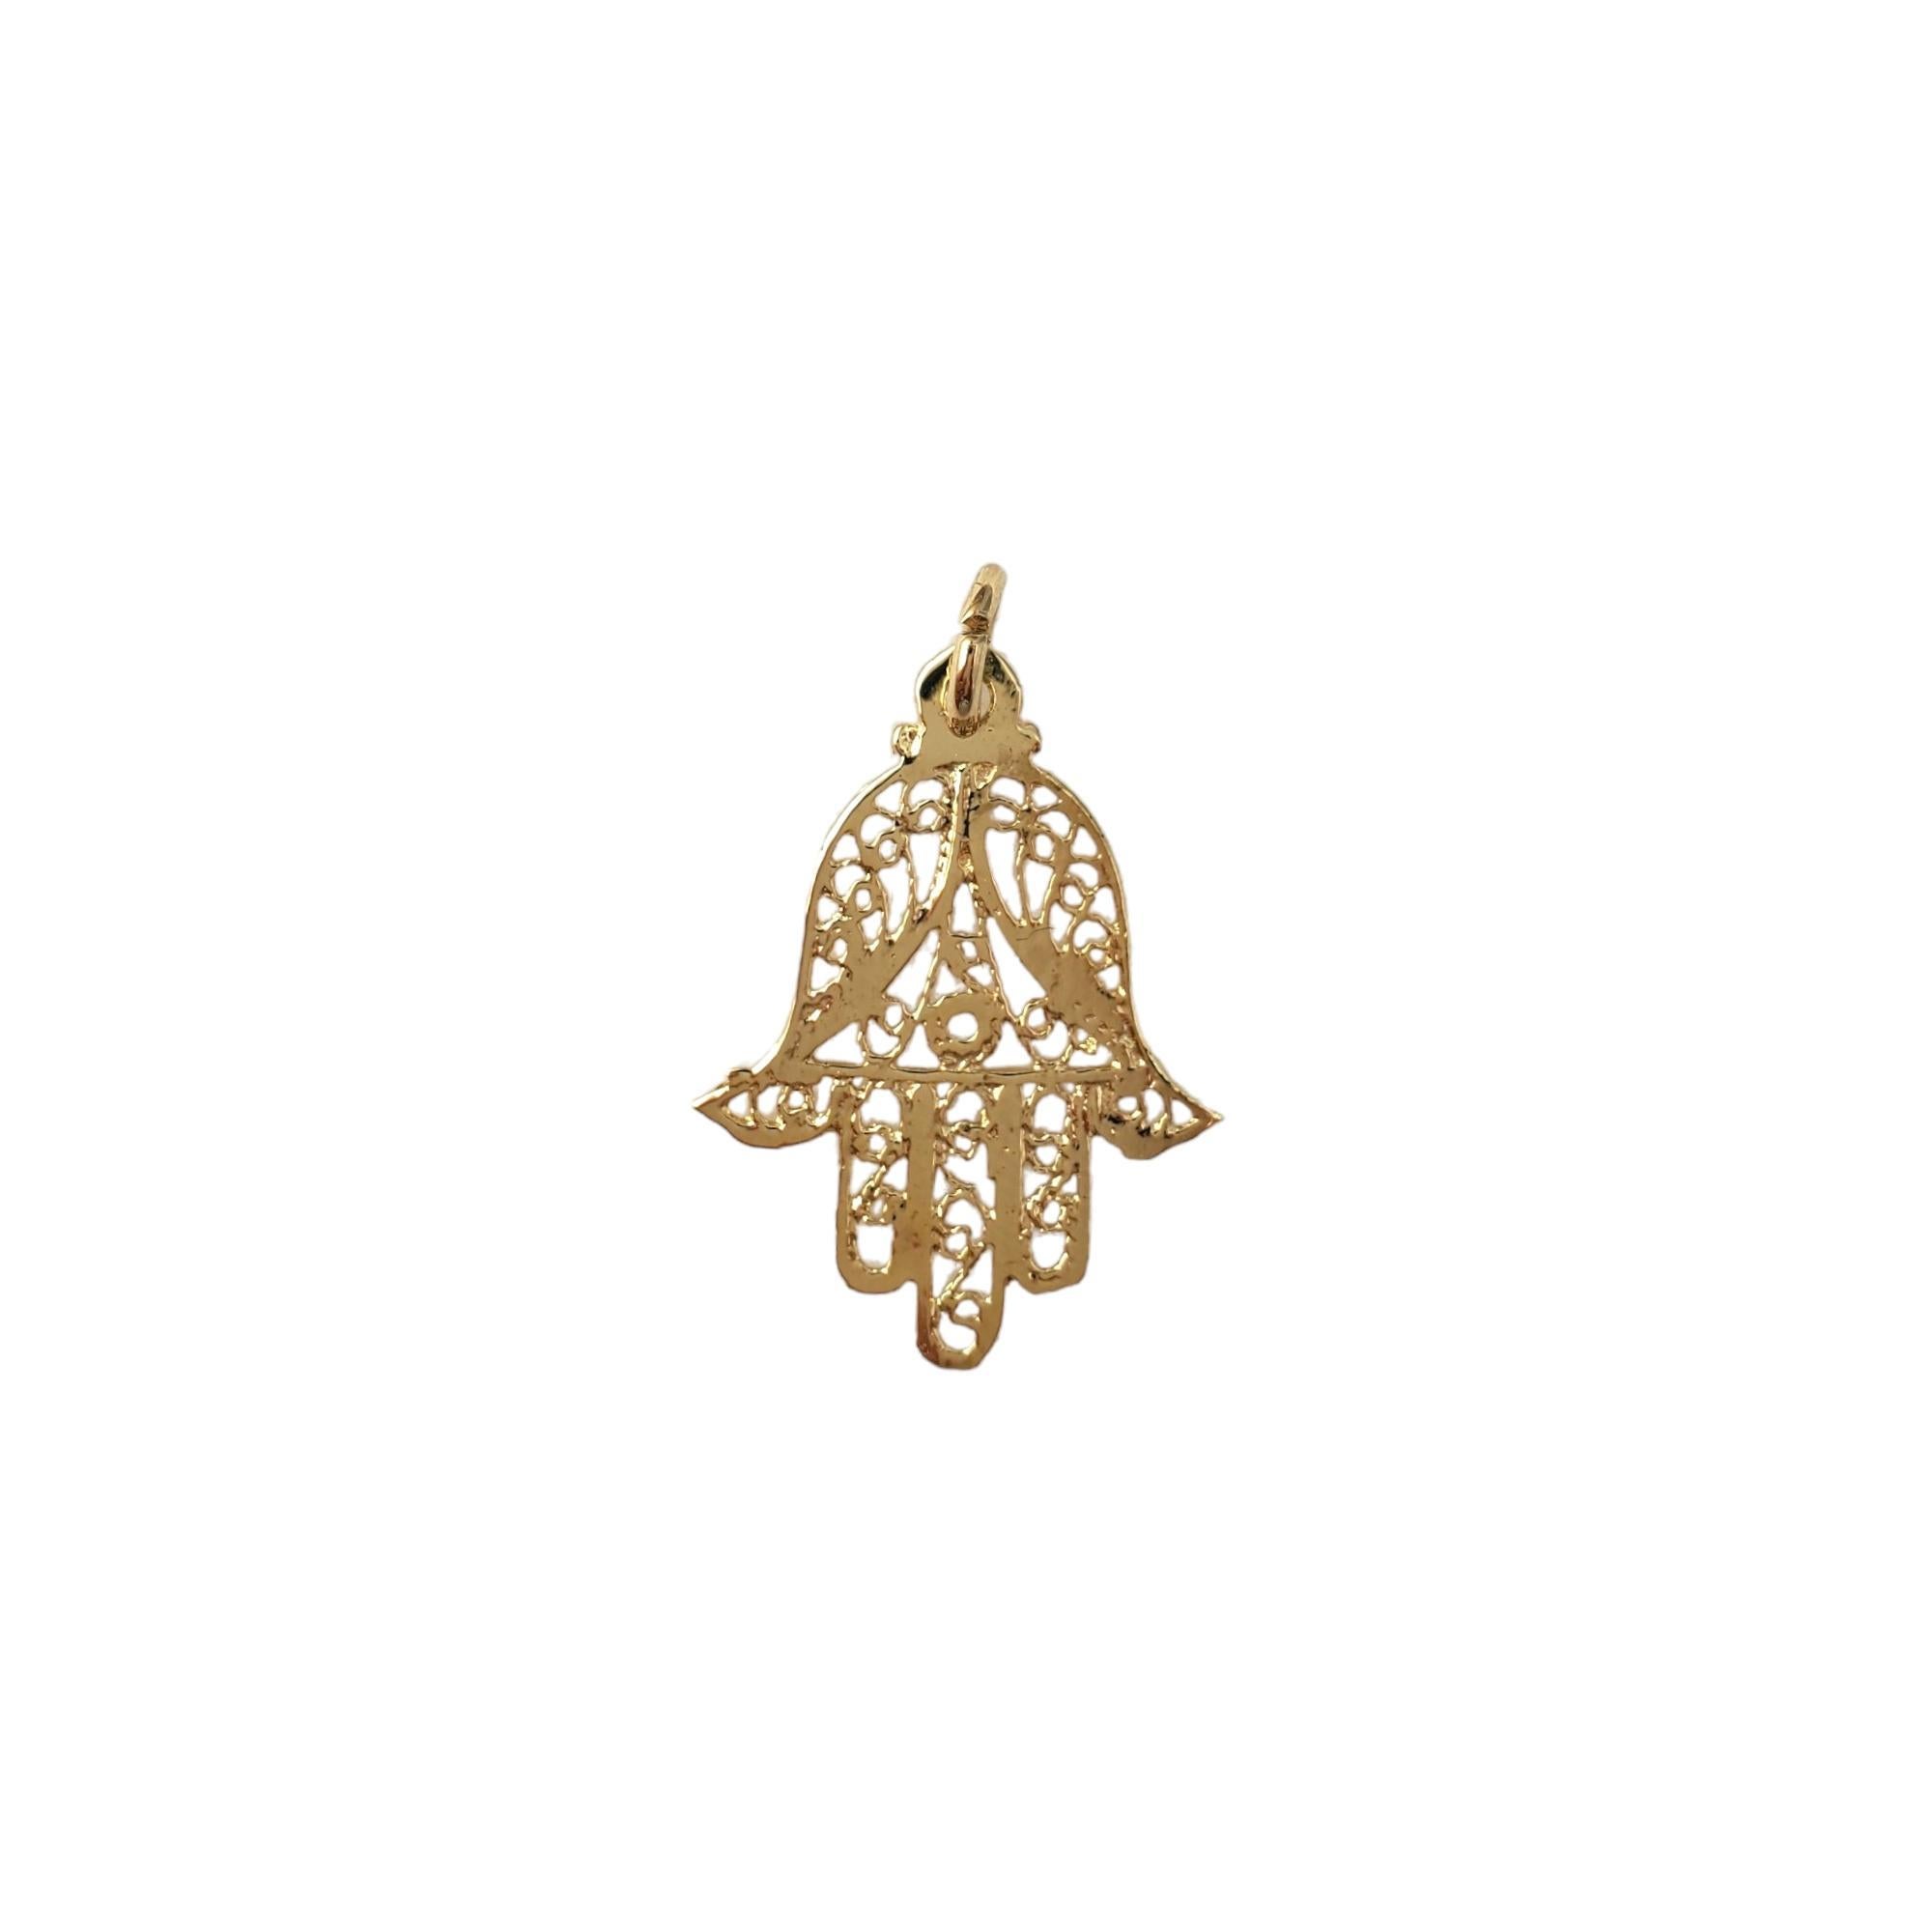 Vintage 14K Yellow Gold Hamsa Hand Charm - 

This Hamsa hand charm symbolizes good fortune and protection. 

Size:  25mm X 15mm

Weight:  0.3 dwt. /  0.47 gr.

Very good condition, professionally polished.

*Chain not included*

Will come packaged